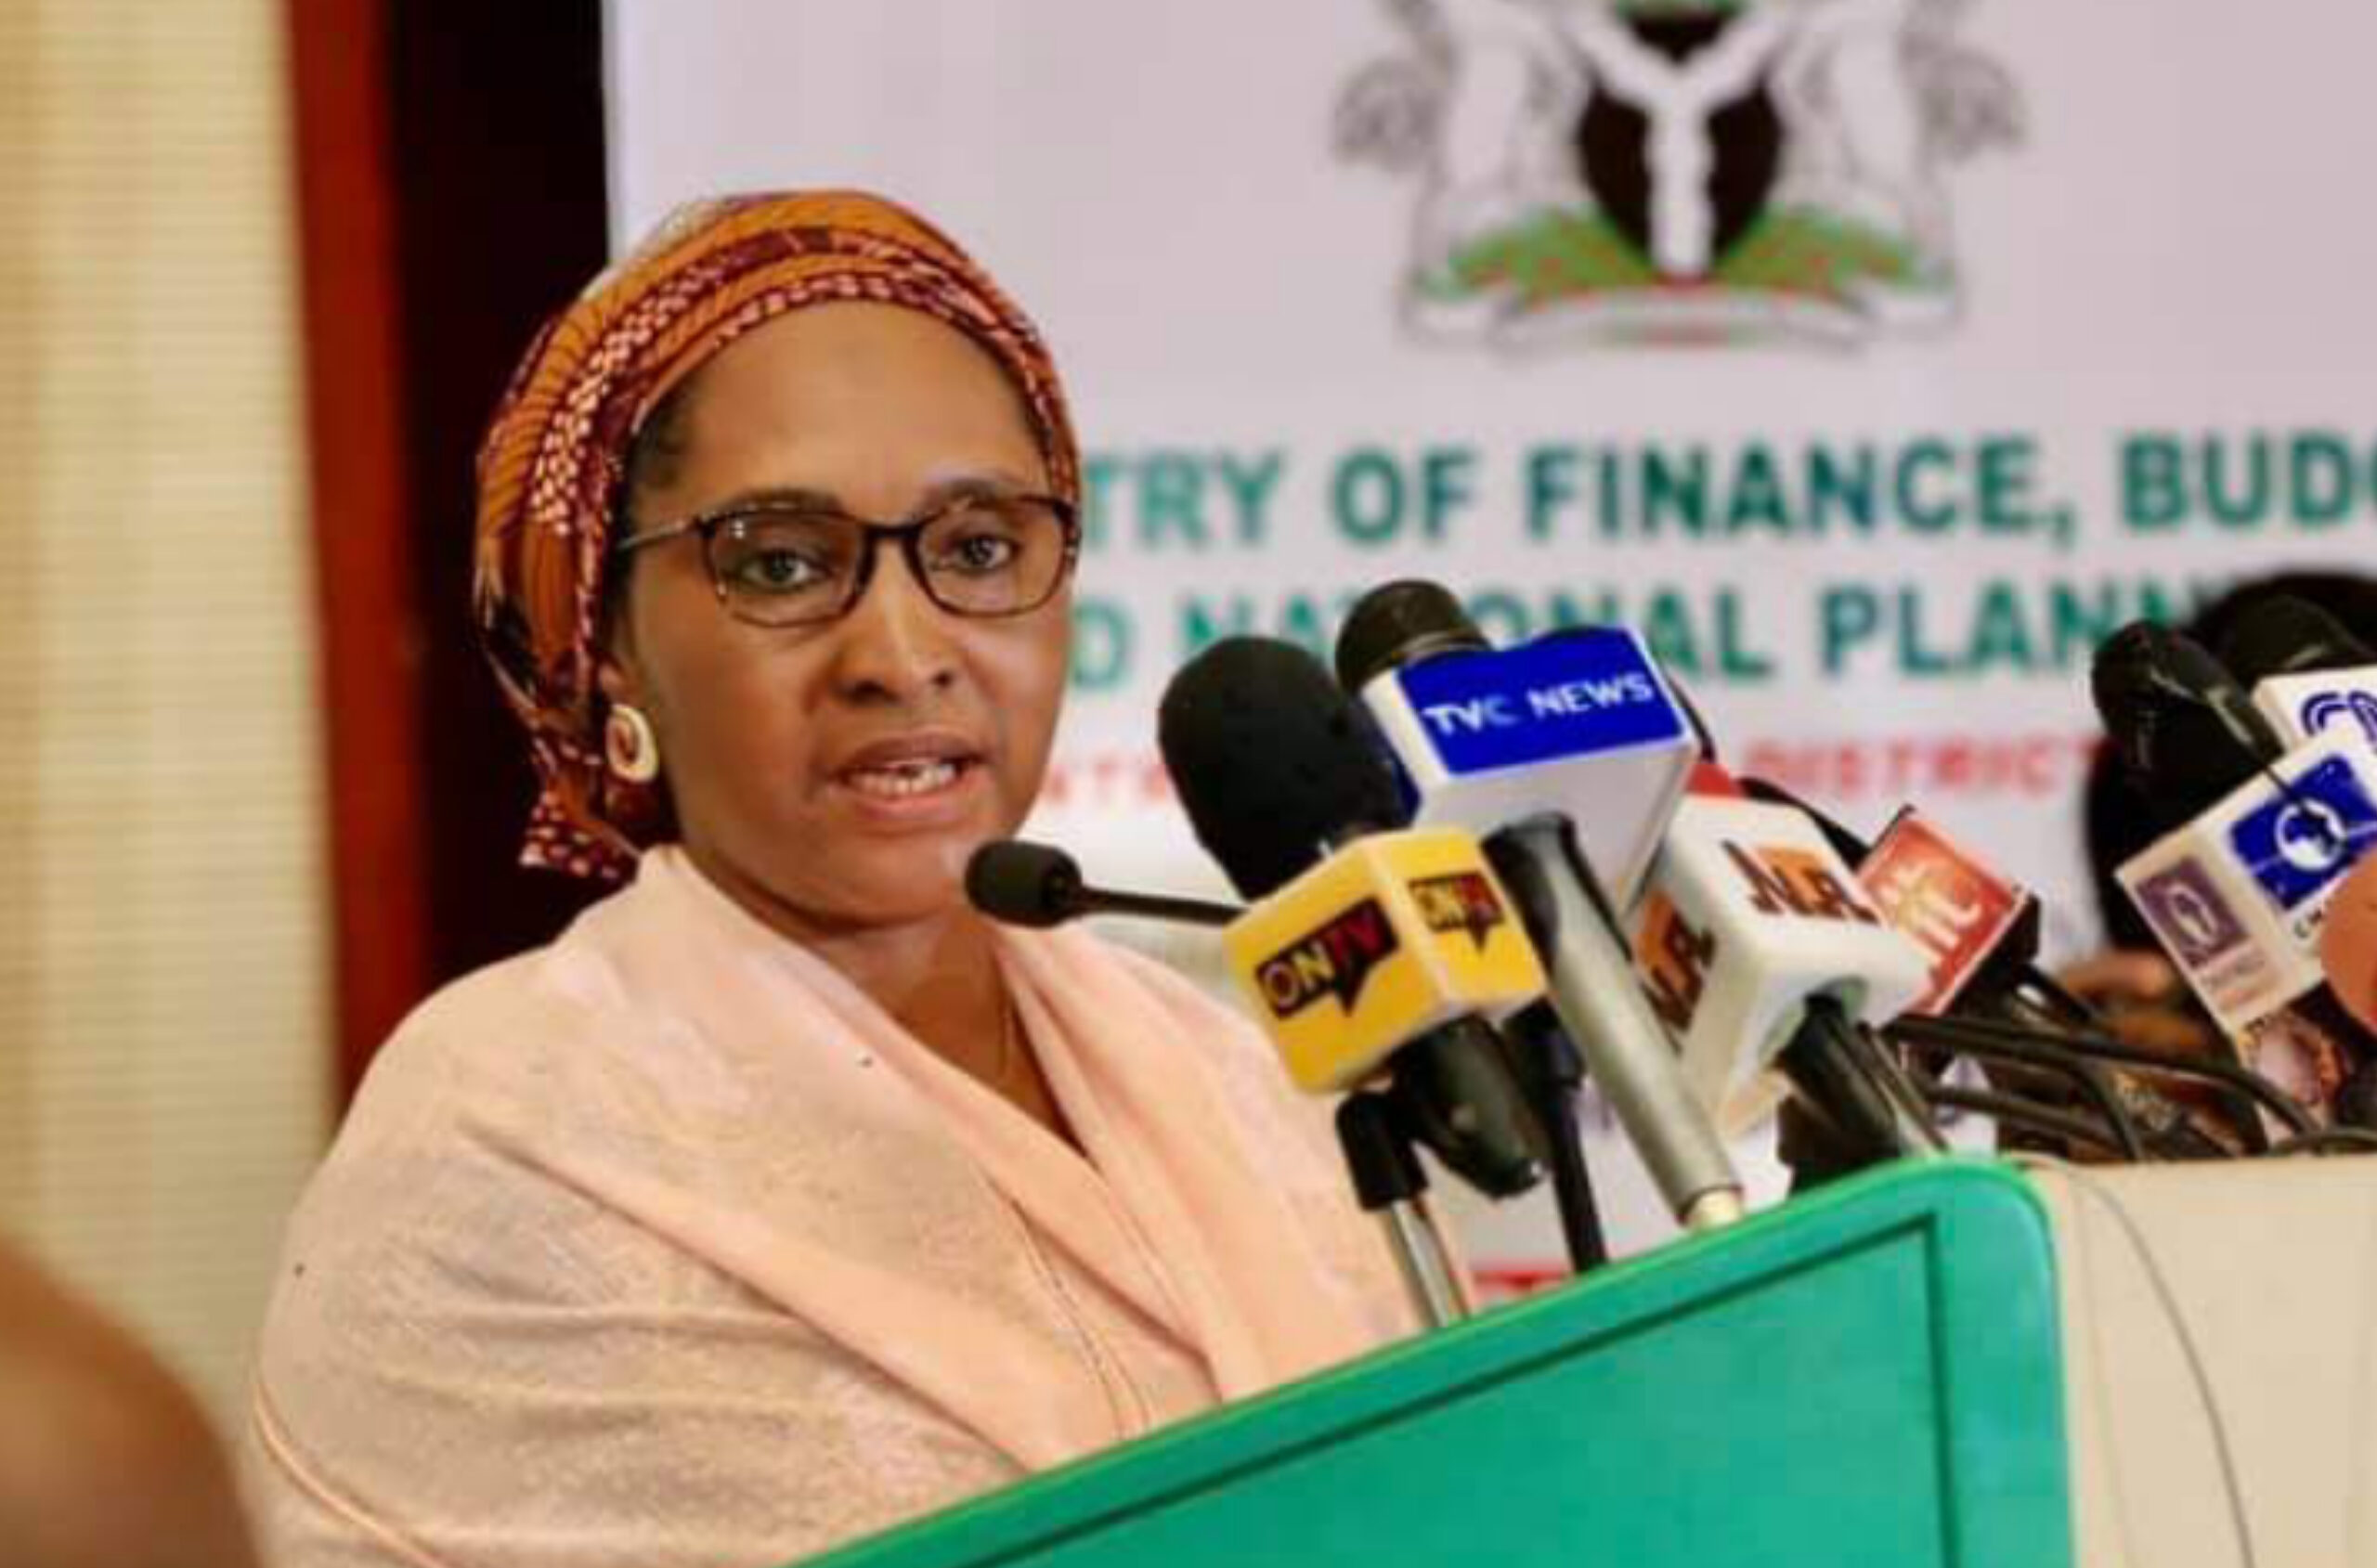 FG sets to implement 5% additional tax on telecom services - 21st CENTURY  CHRONICLE